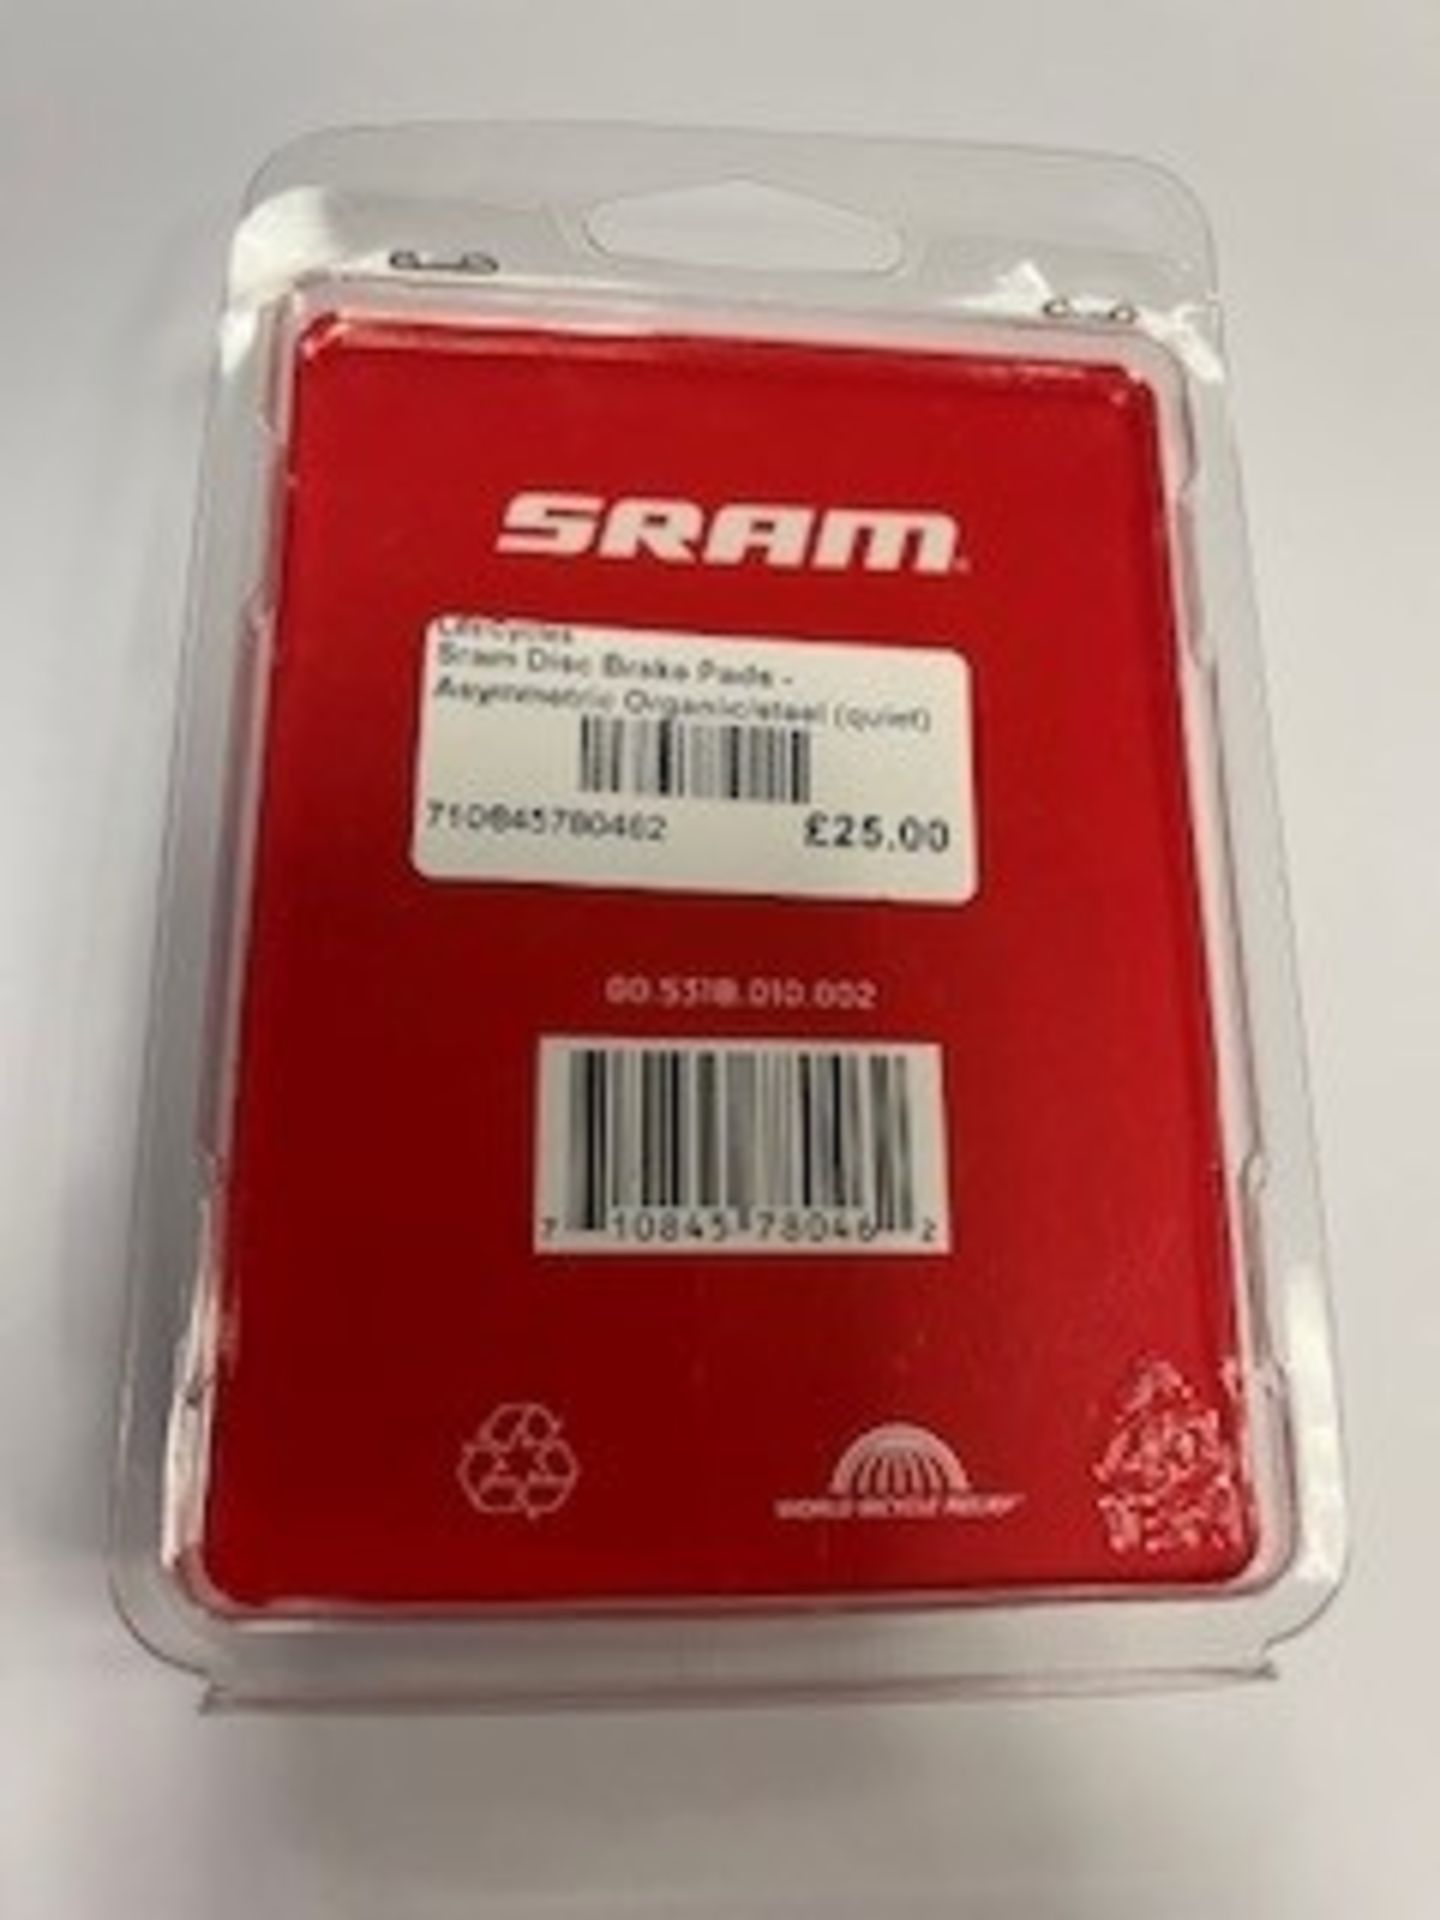 Sram Brake Pads to include 5x Disc Brake Pads Organic with Steel Backing Plate (HRD, LEVEL ULT, LEVE - Image 8 of 9